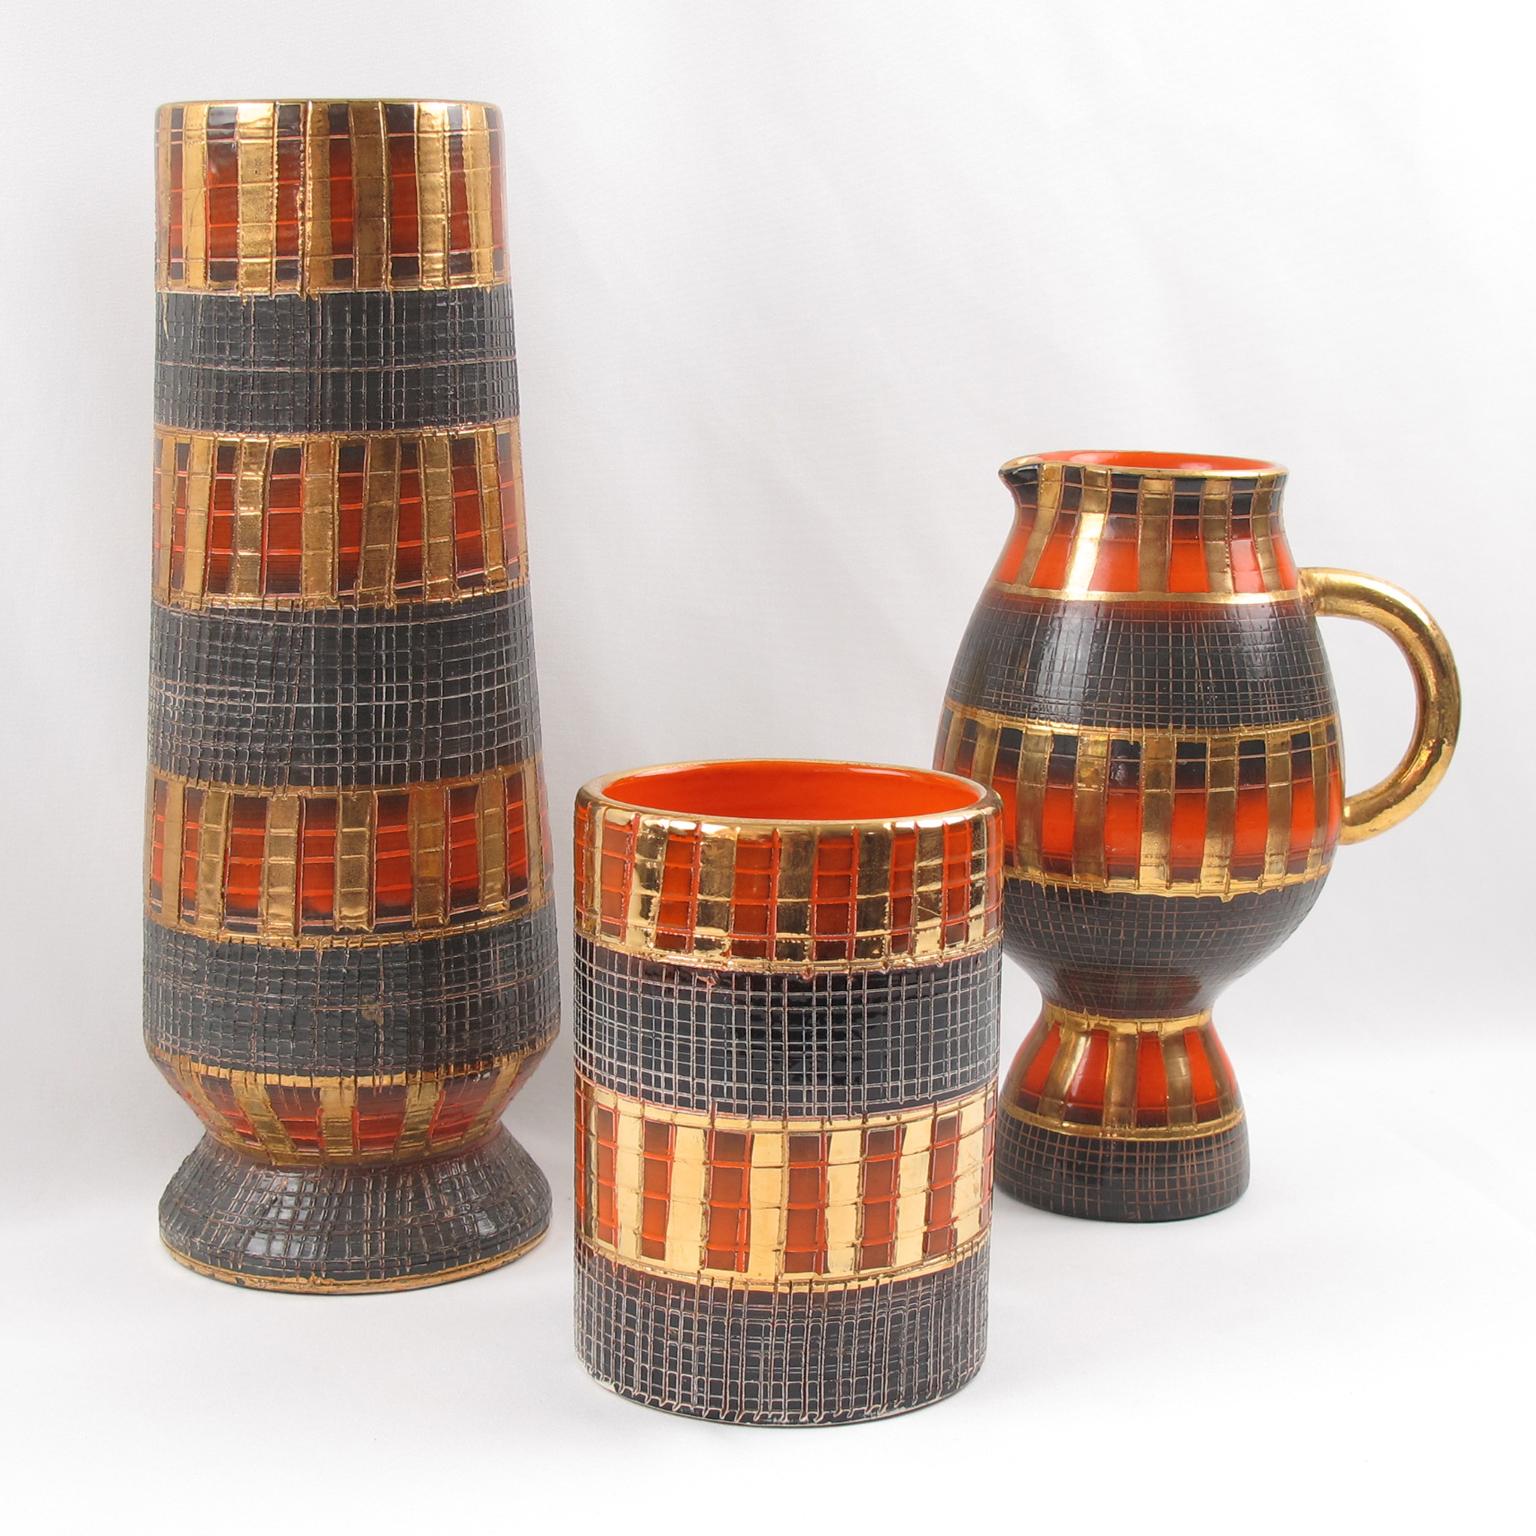 Beautiful 1950s Mid-Century Modern handcrafted and hand-decorated set of three vases by Fratelli Fanciullacci for Bitossi and imported by Raymor. Italian art ceramic two vases and one pitcher with unique sgraffito design.
Those pieces lean more